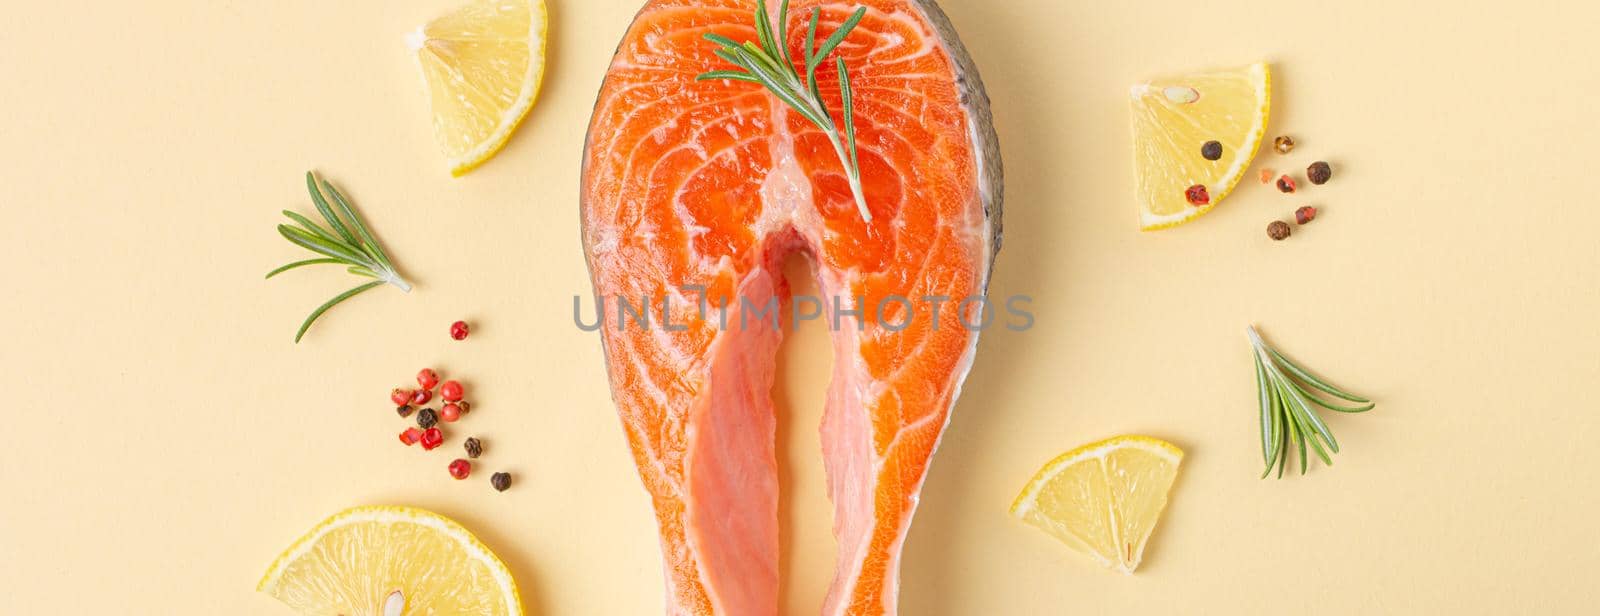 Raw fresh fish salmon steak top view on beige pastel background from above by its_al_dente